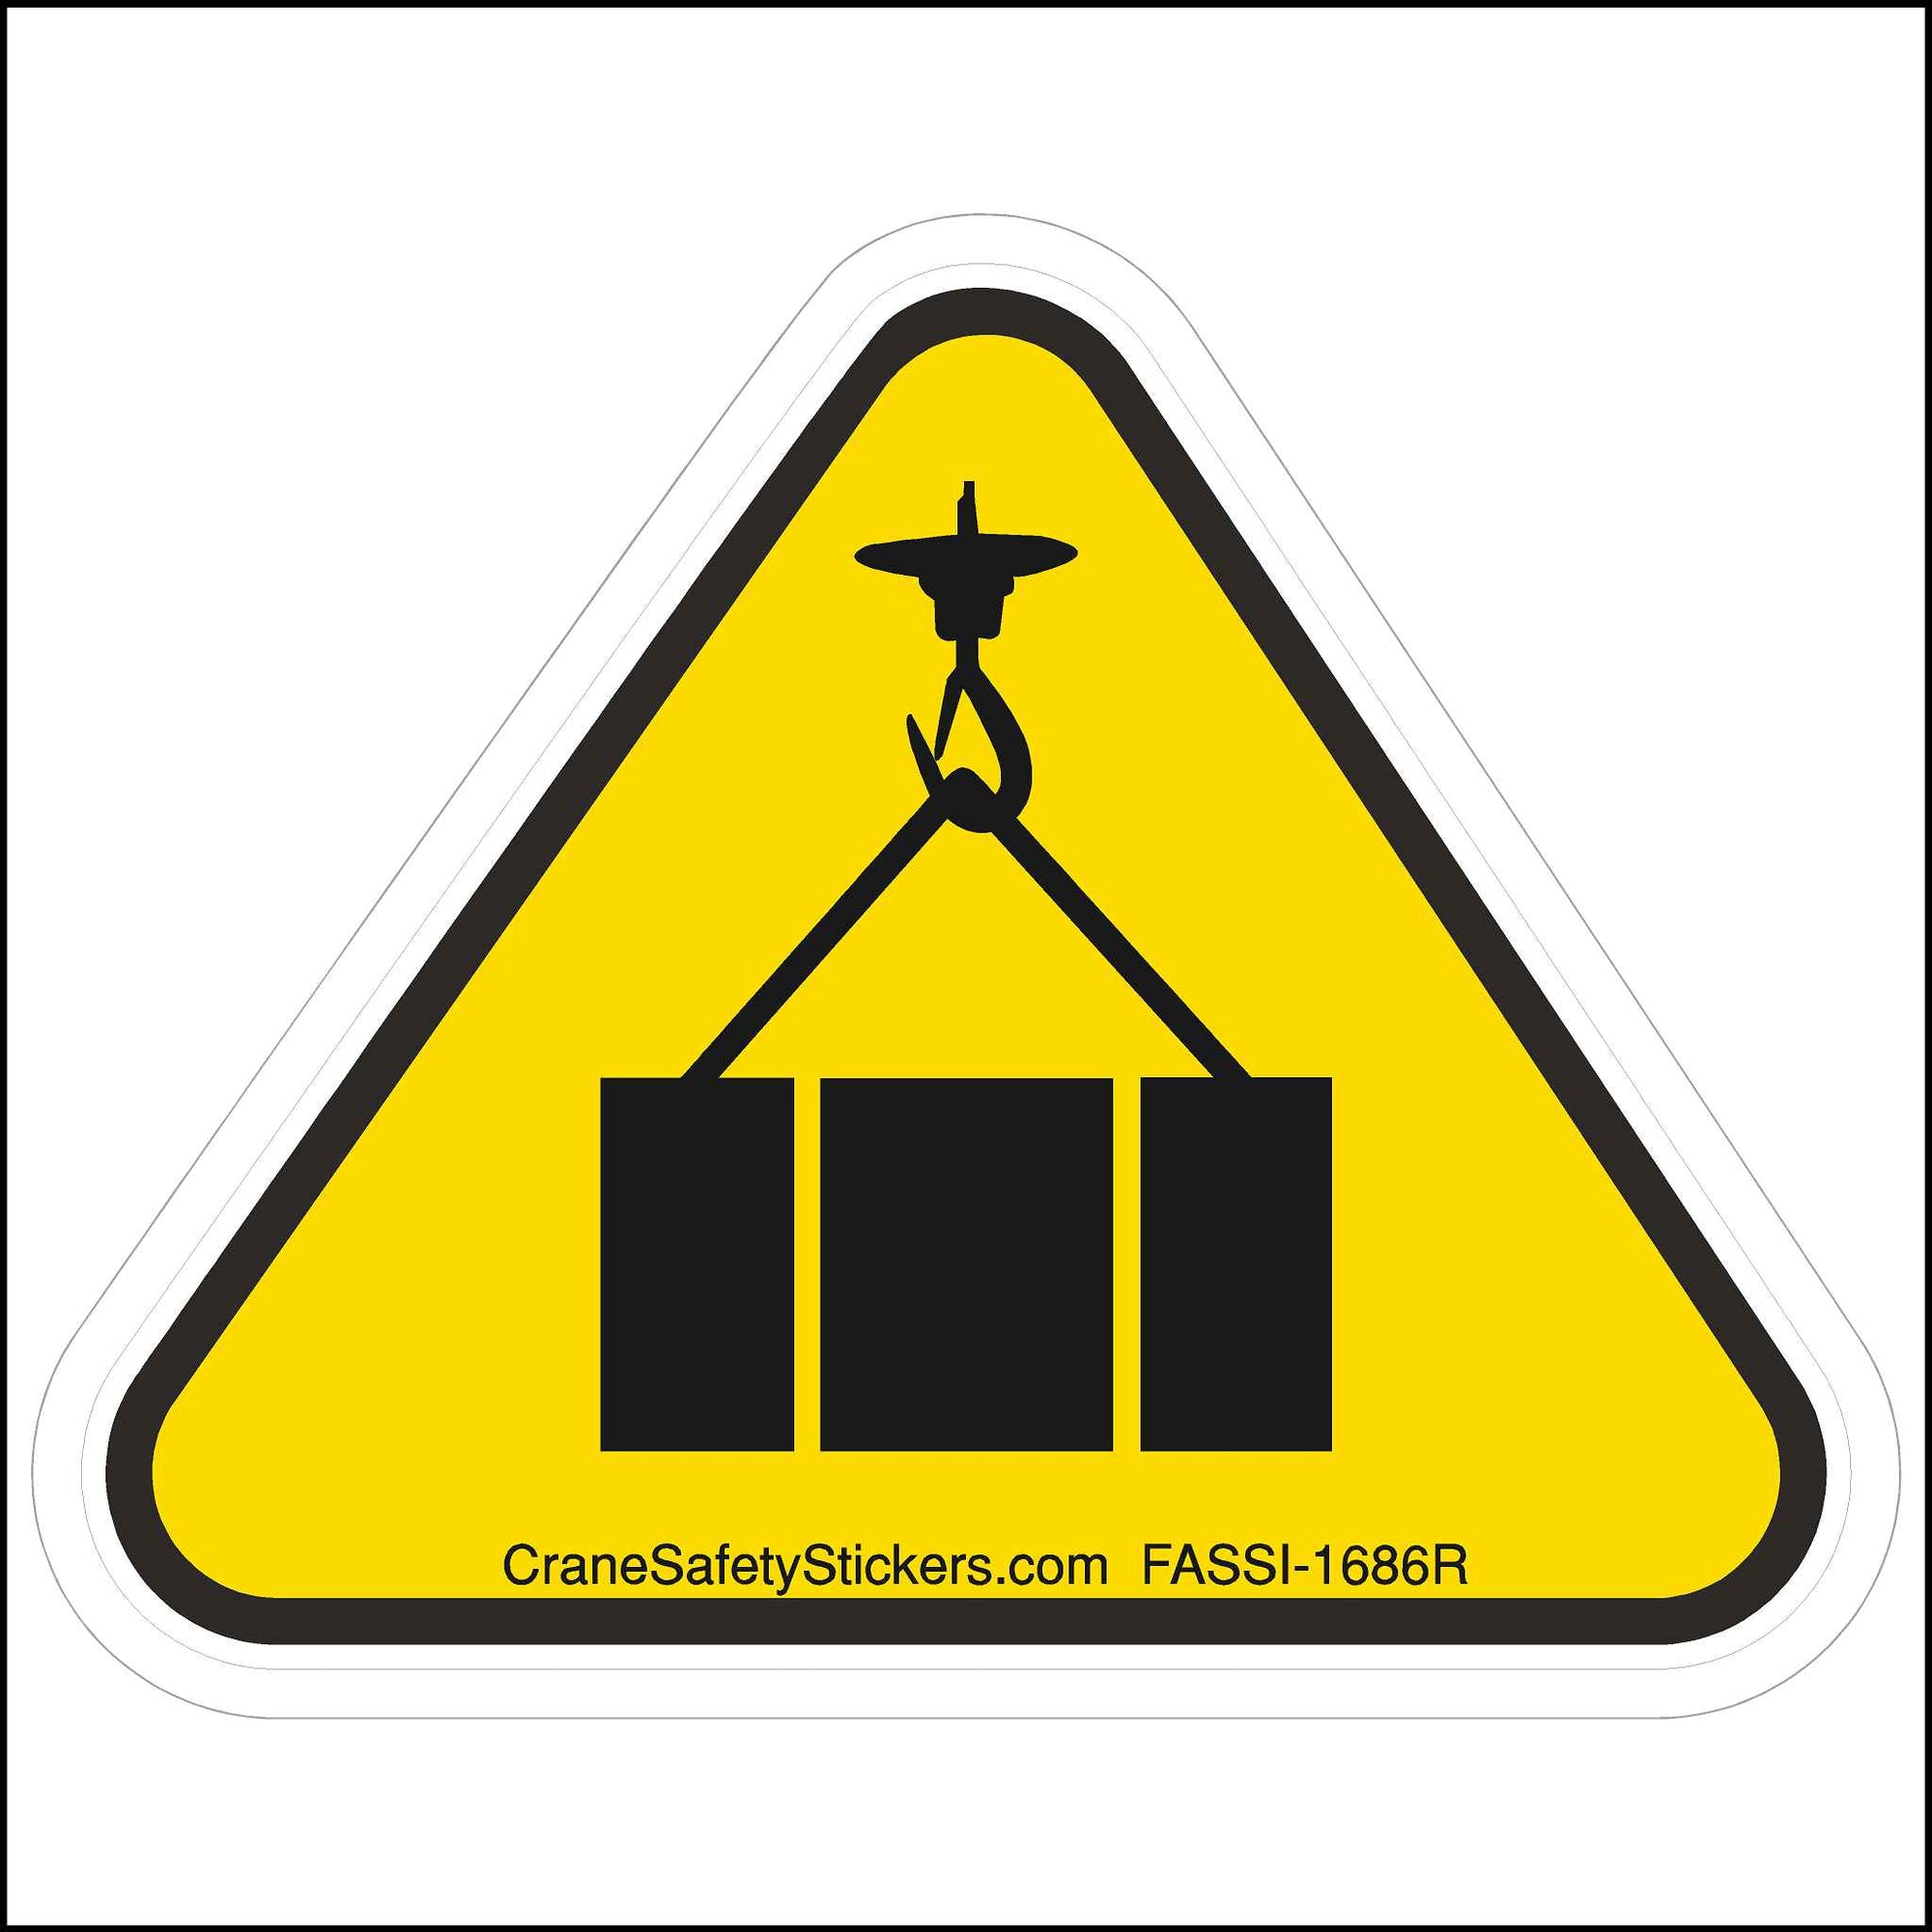 FASSI-1686 Overhead Load Safety Sticker. Printed in yellow and black with a crane hook holding a load.